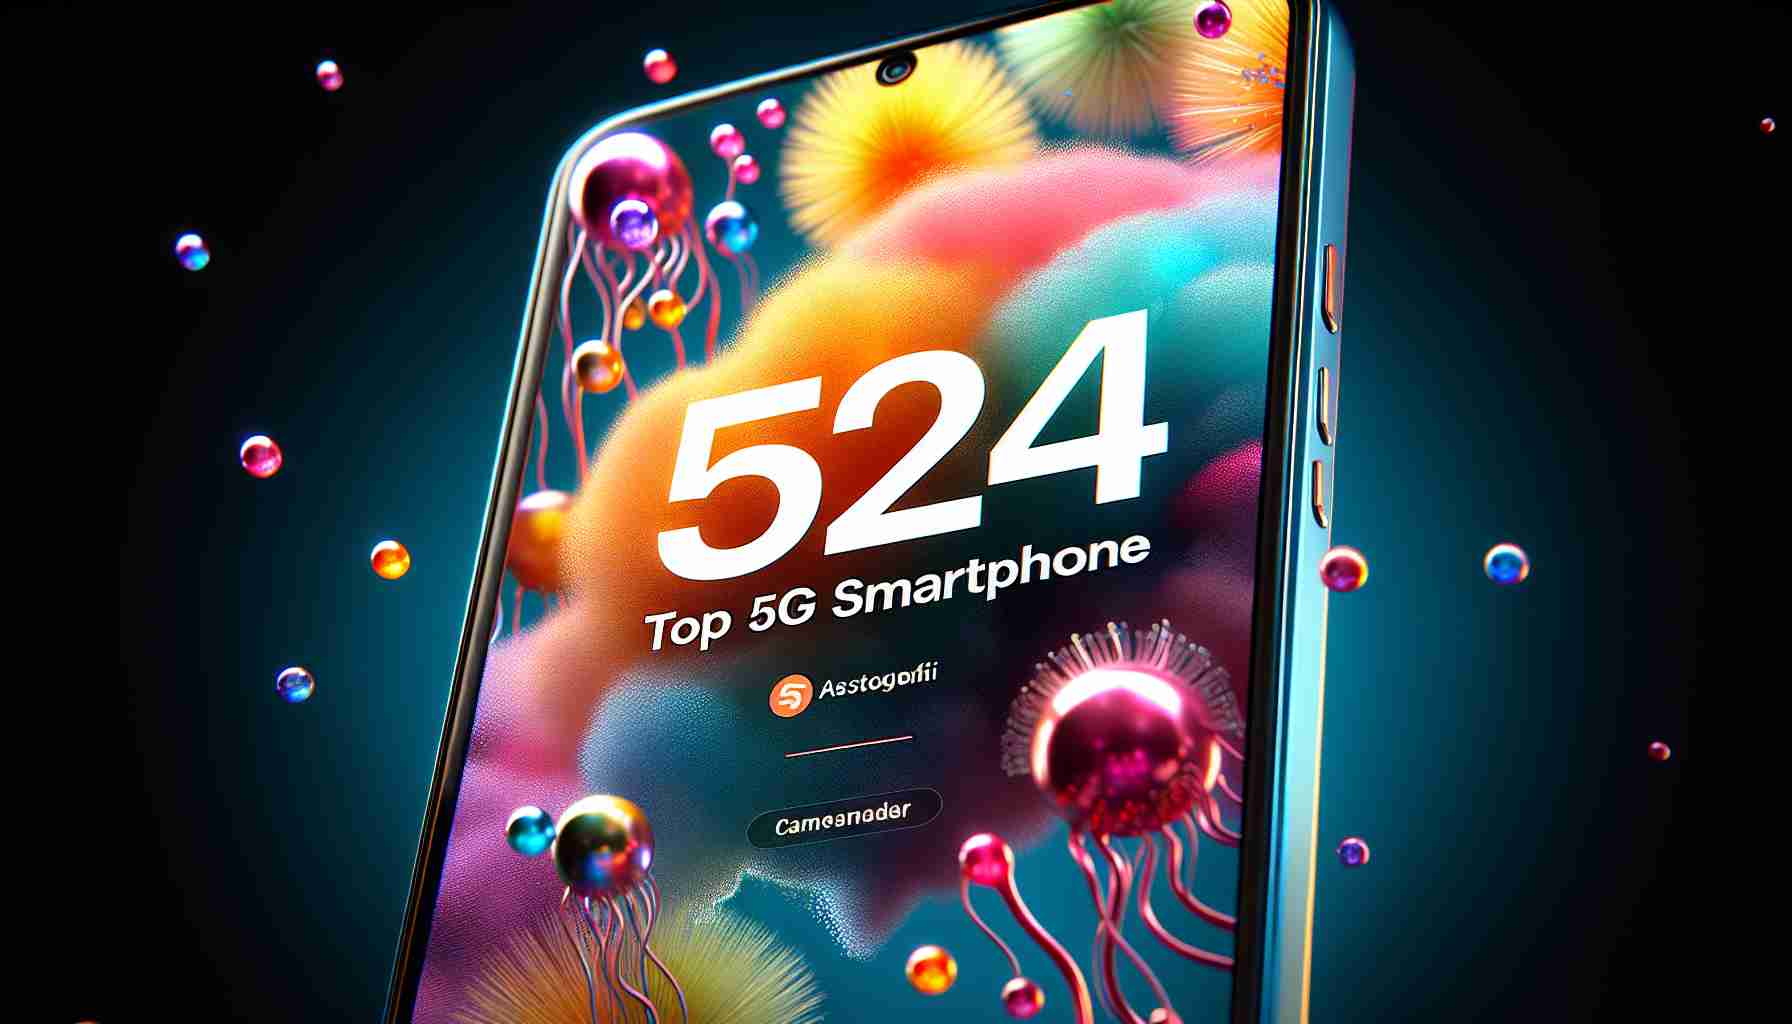 Samsung’s Galaxy S24 Named Top 5G Smartphone by American Consumers